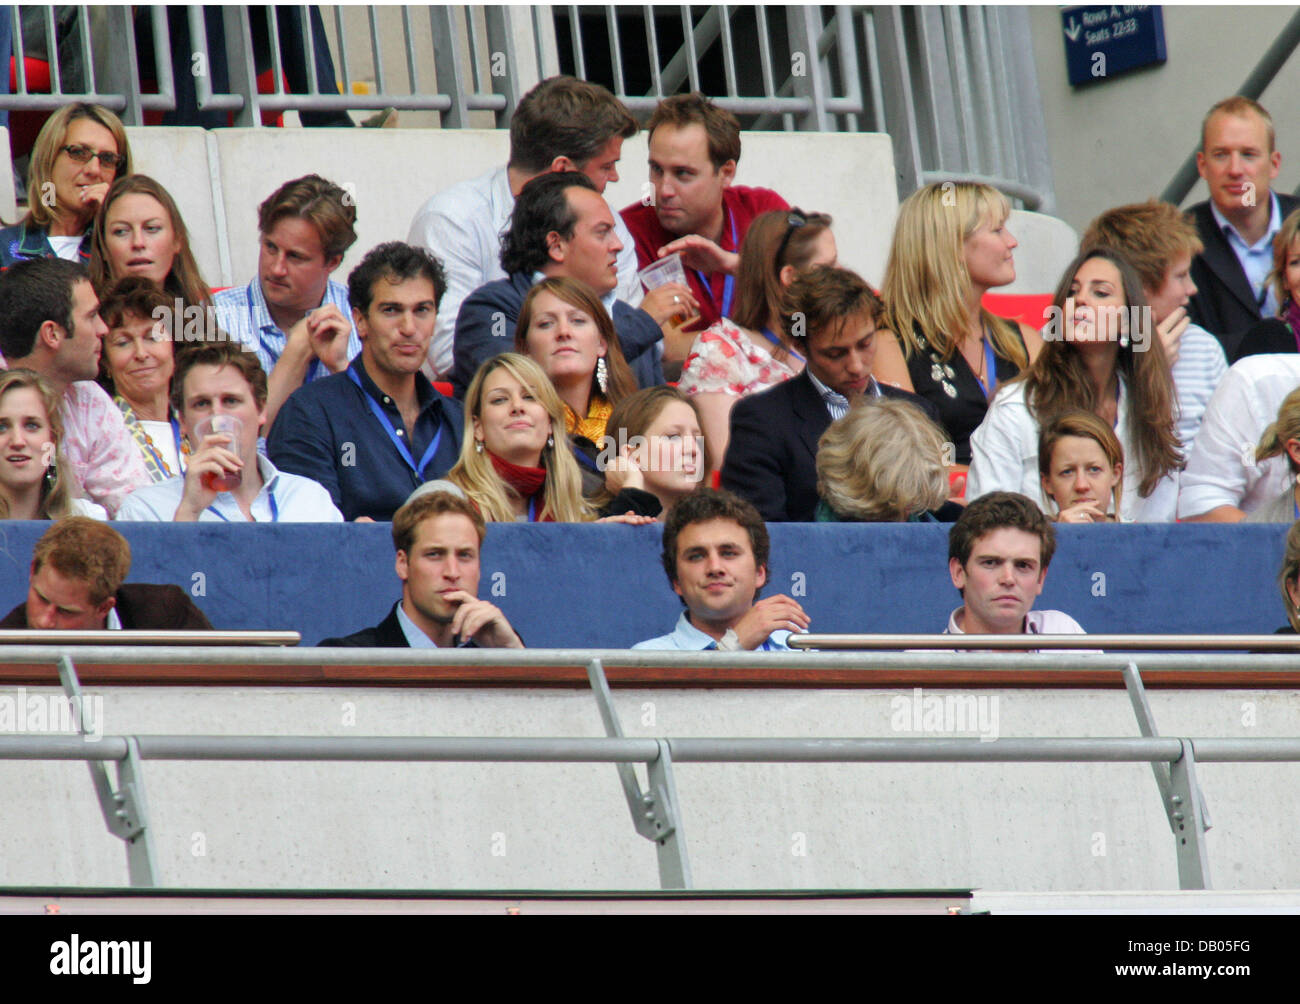 Prince William (2nd R), Prince Harry (2nd L) and his girlfriend Chelsy Davy (L) seen in the crowd at the charity concert in memory of Diana, Princess of Wales on what would have been her 46th birthday at Wembley Stadium, London, 1 July 2007. Photo: Hubert Boesl Stock Photo